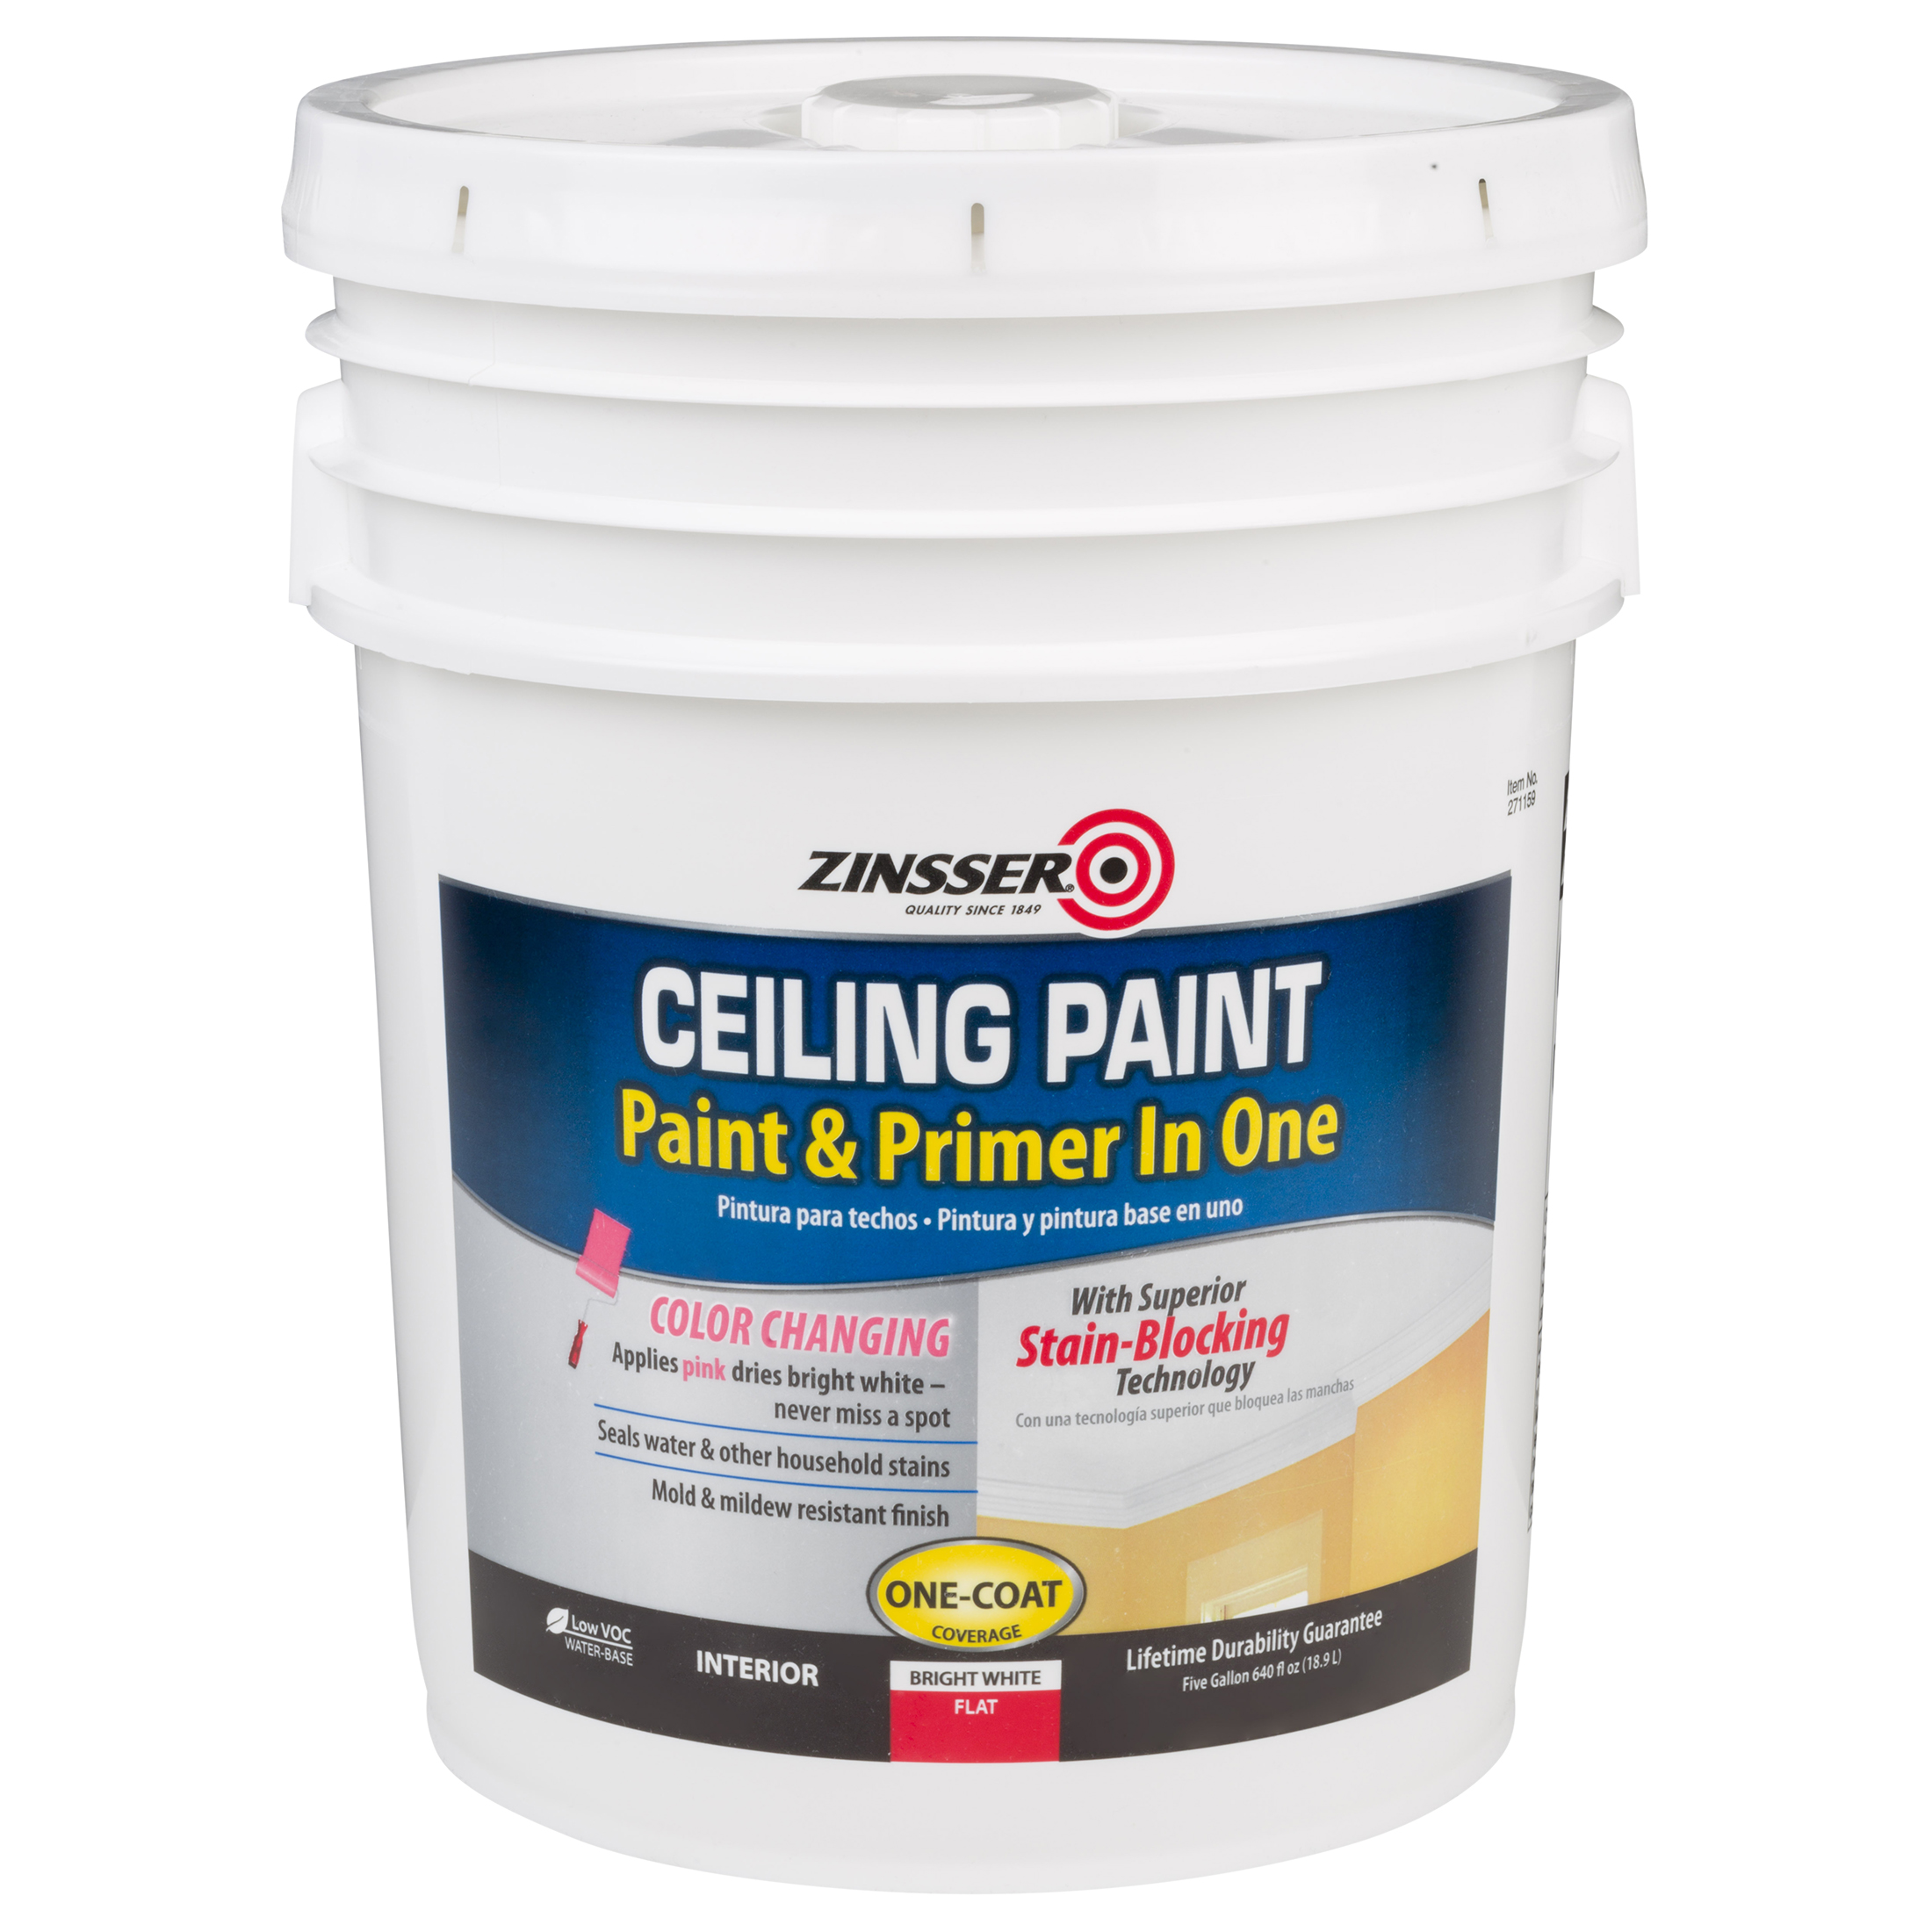 White, Zinsser Flat Ceiling Paint and Primer- 5 Gallon, 1 Per Pack - image 2 of 5